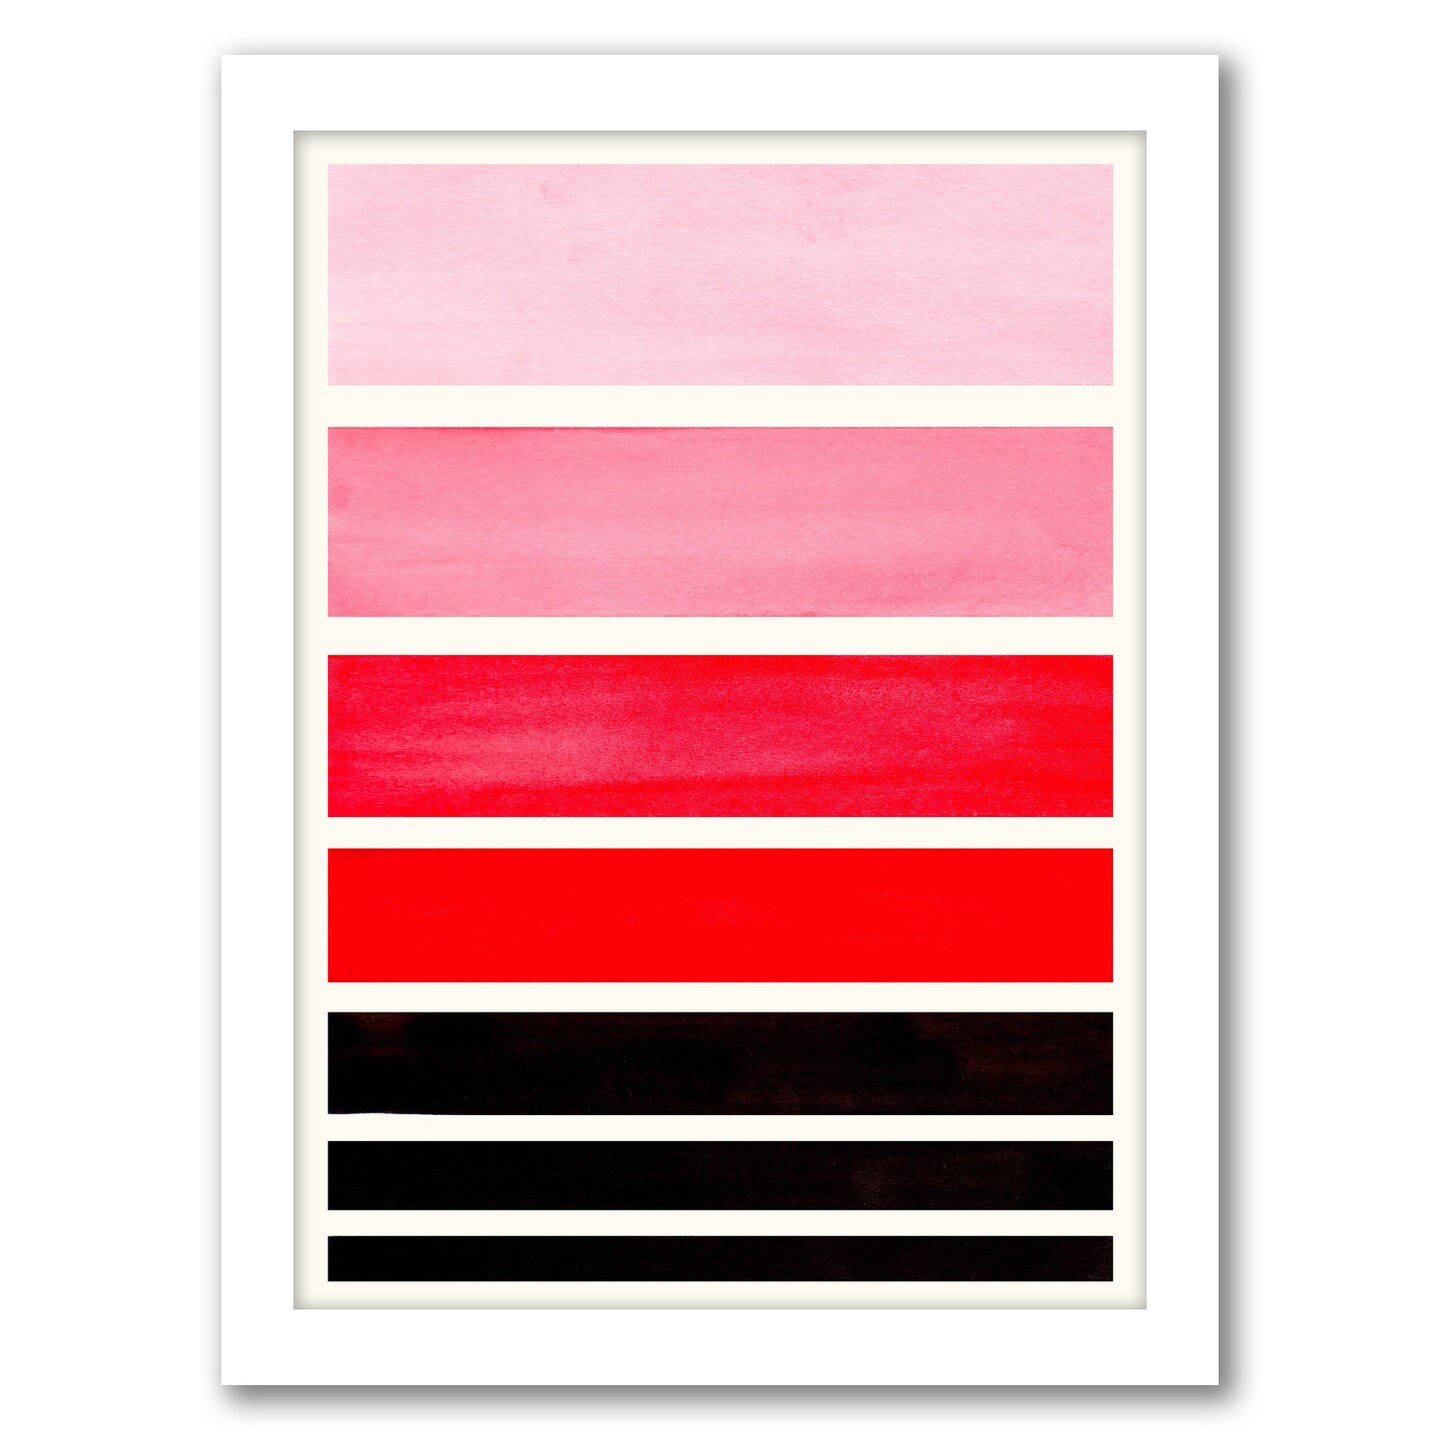 Red Staggered Stripes by Ejaaz Haniff Frame  - Americanflat